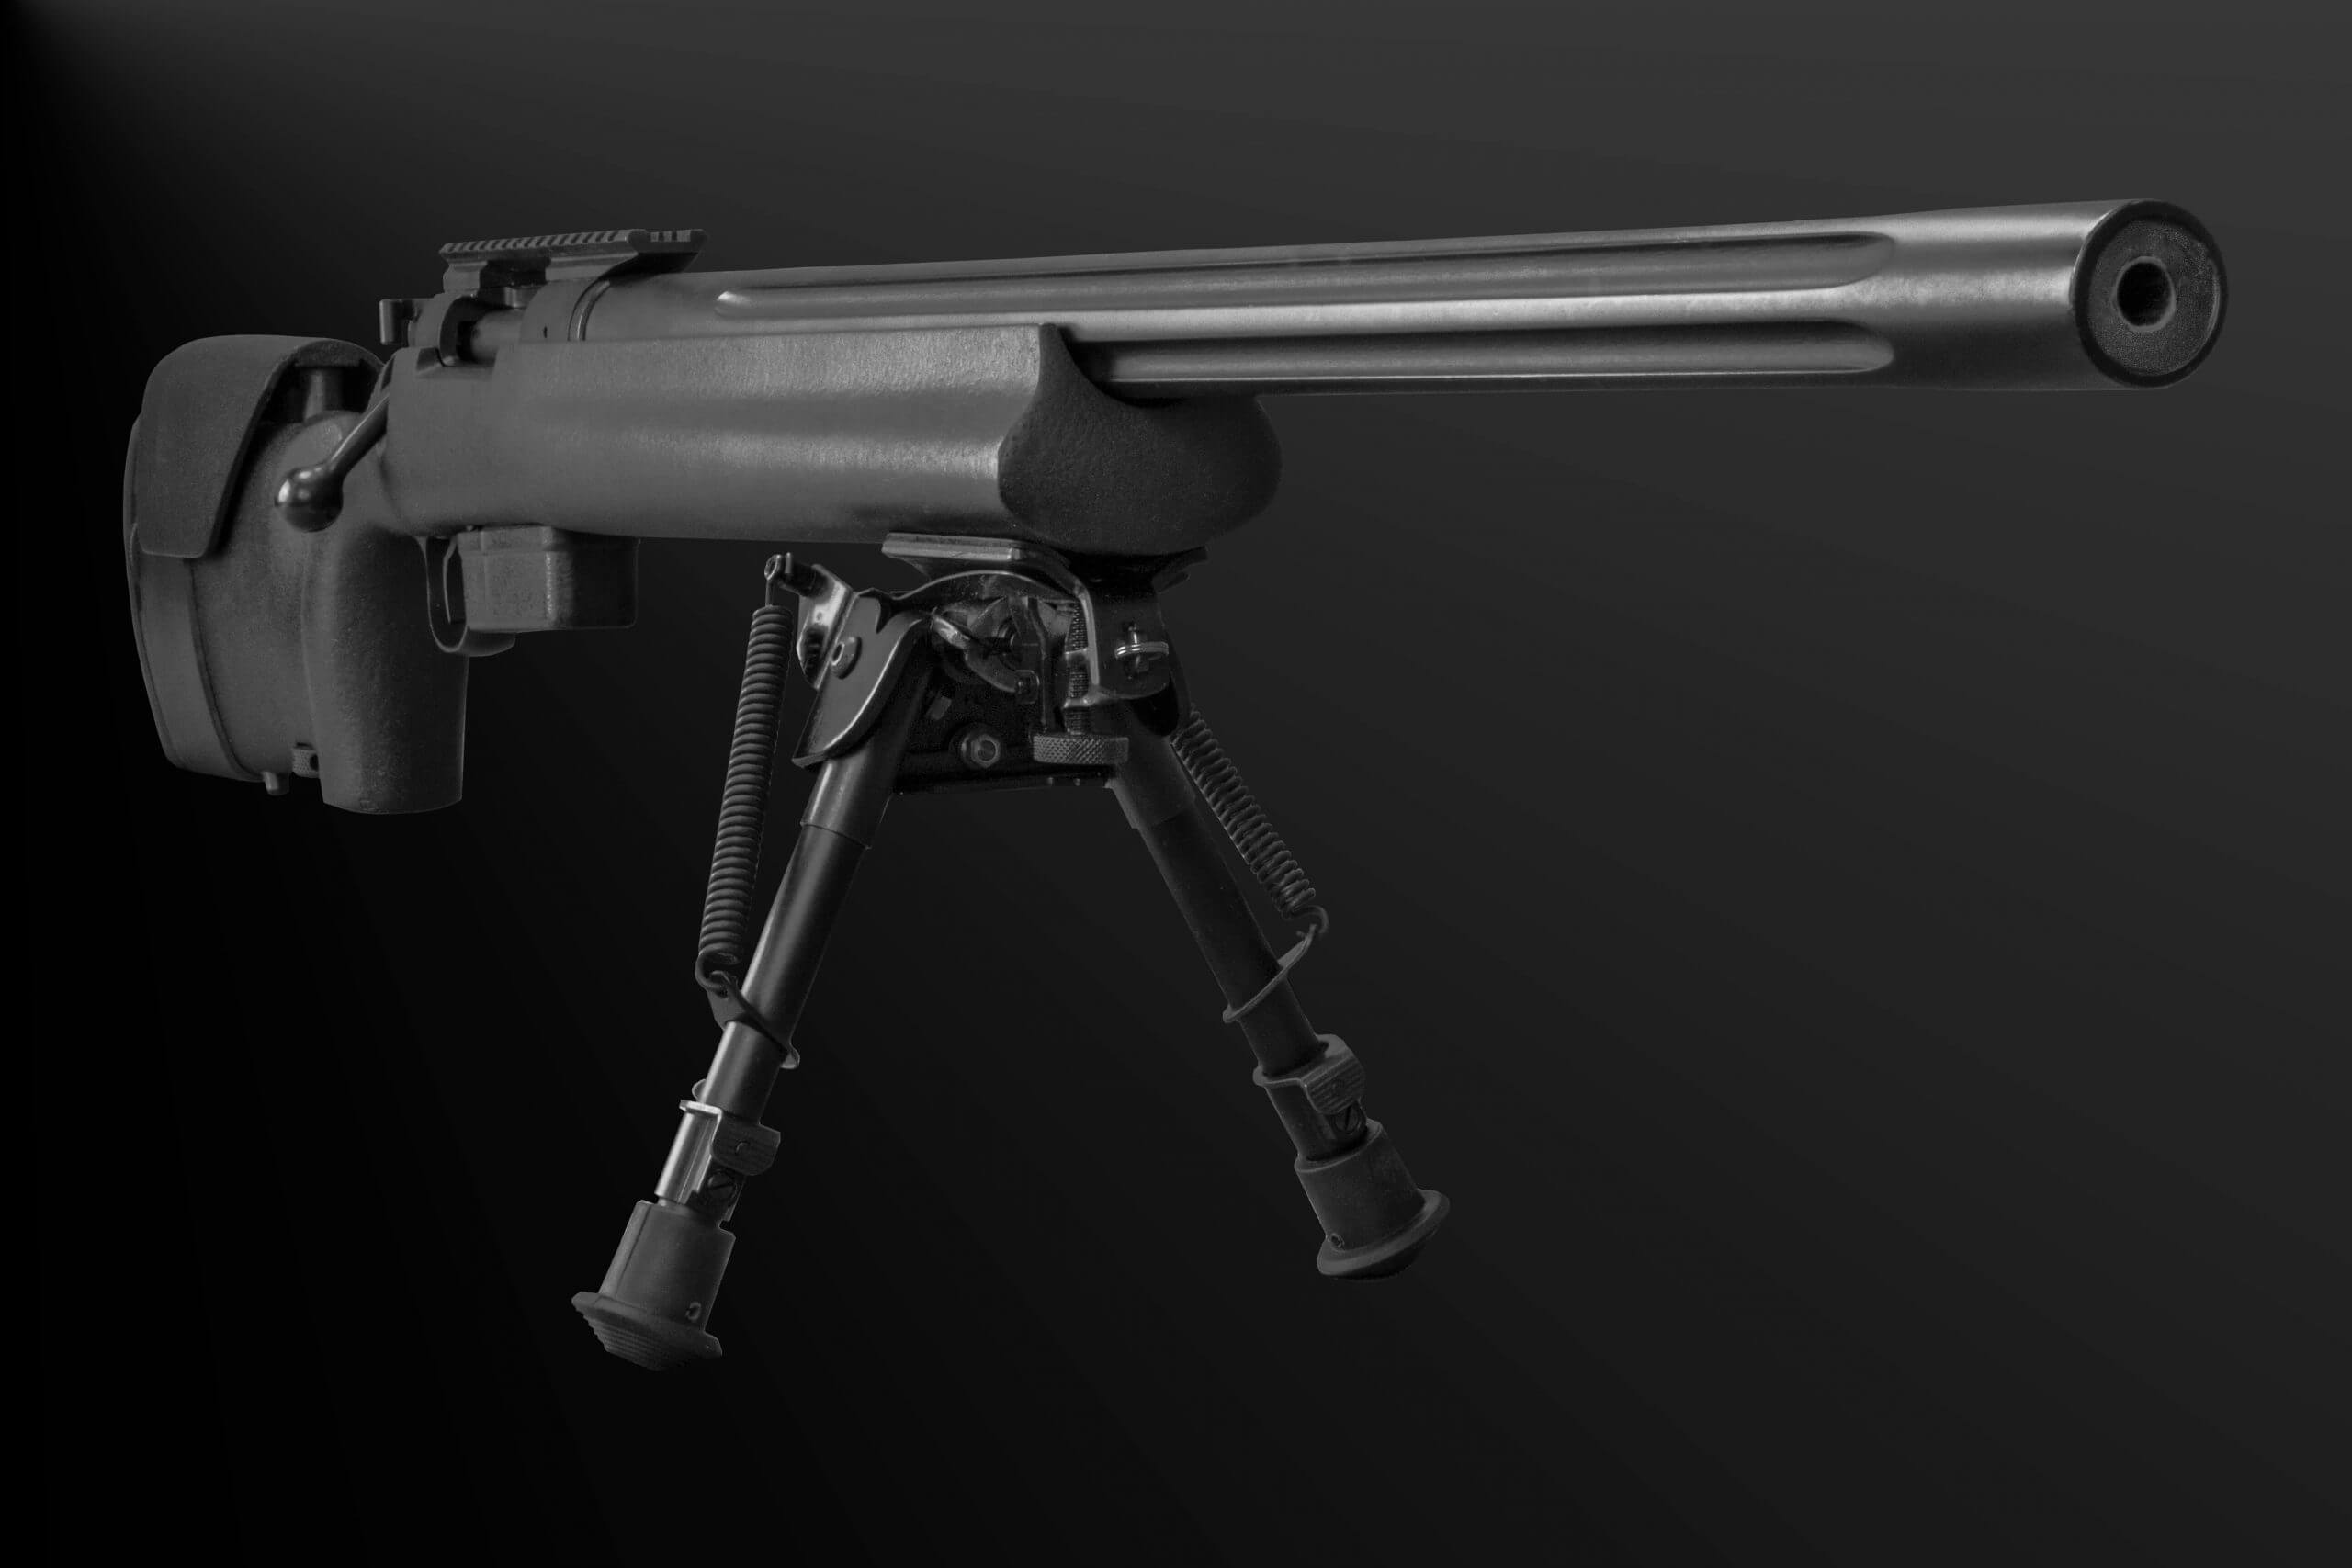 Bolt Action Rifle With Bipod On Black Background